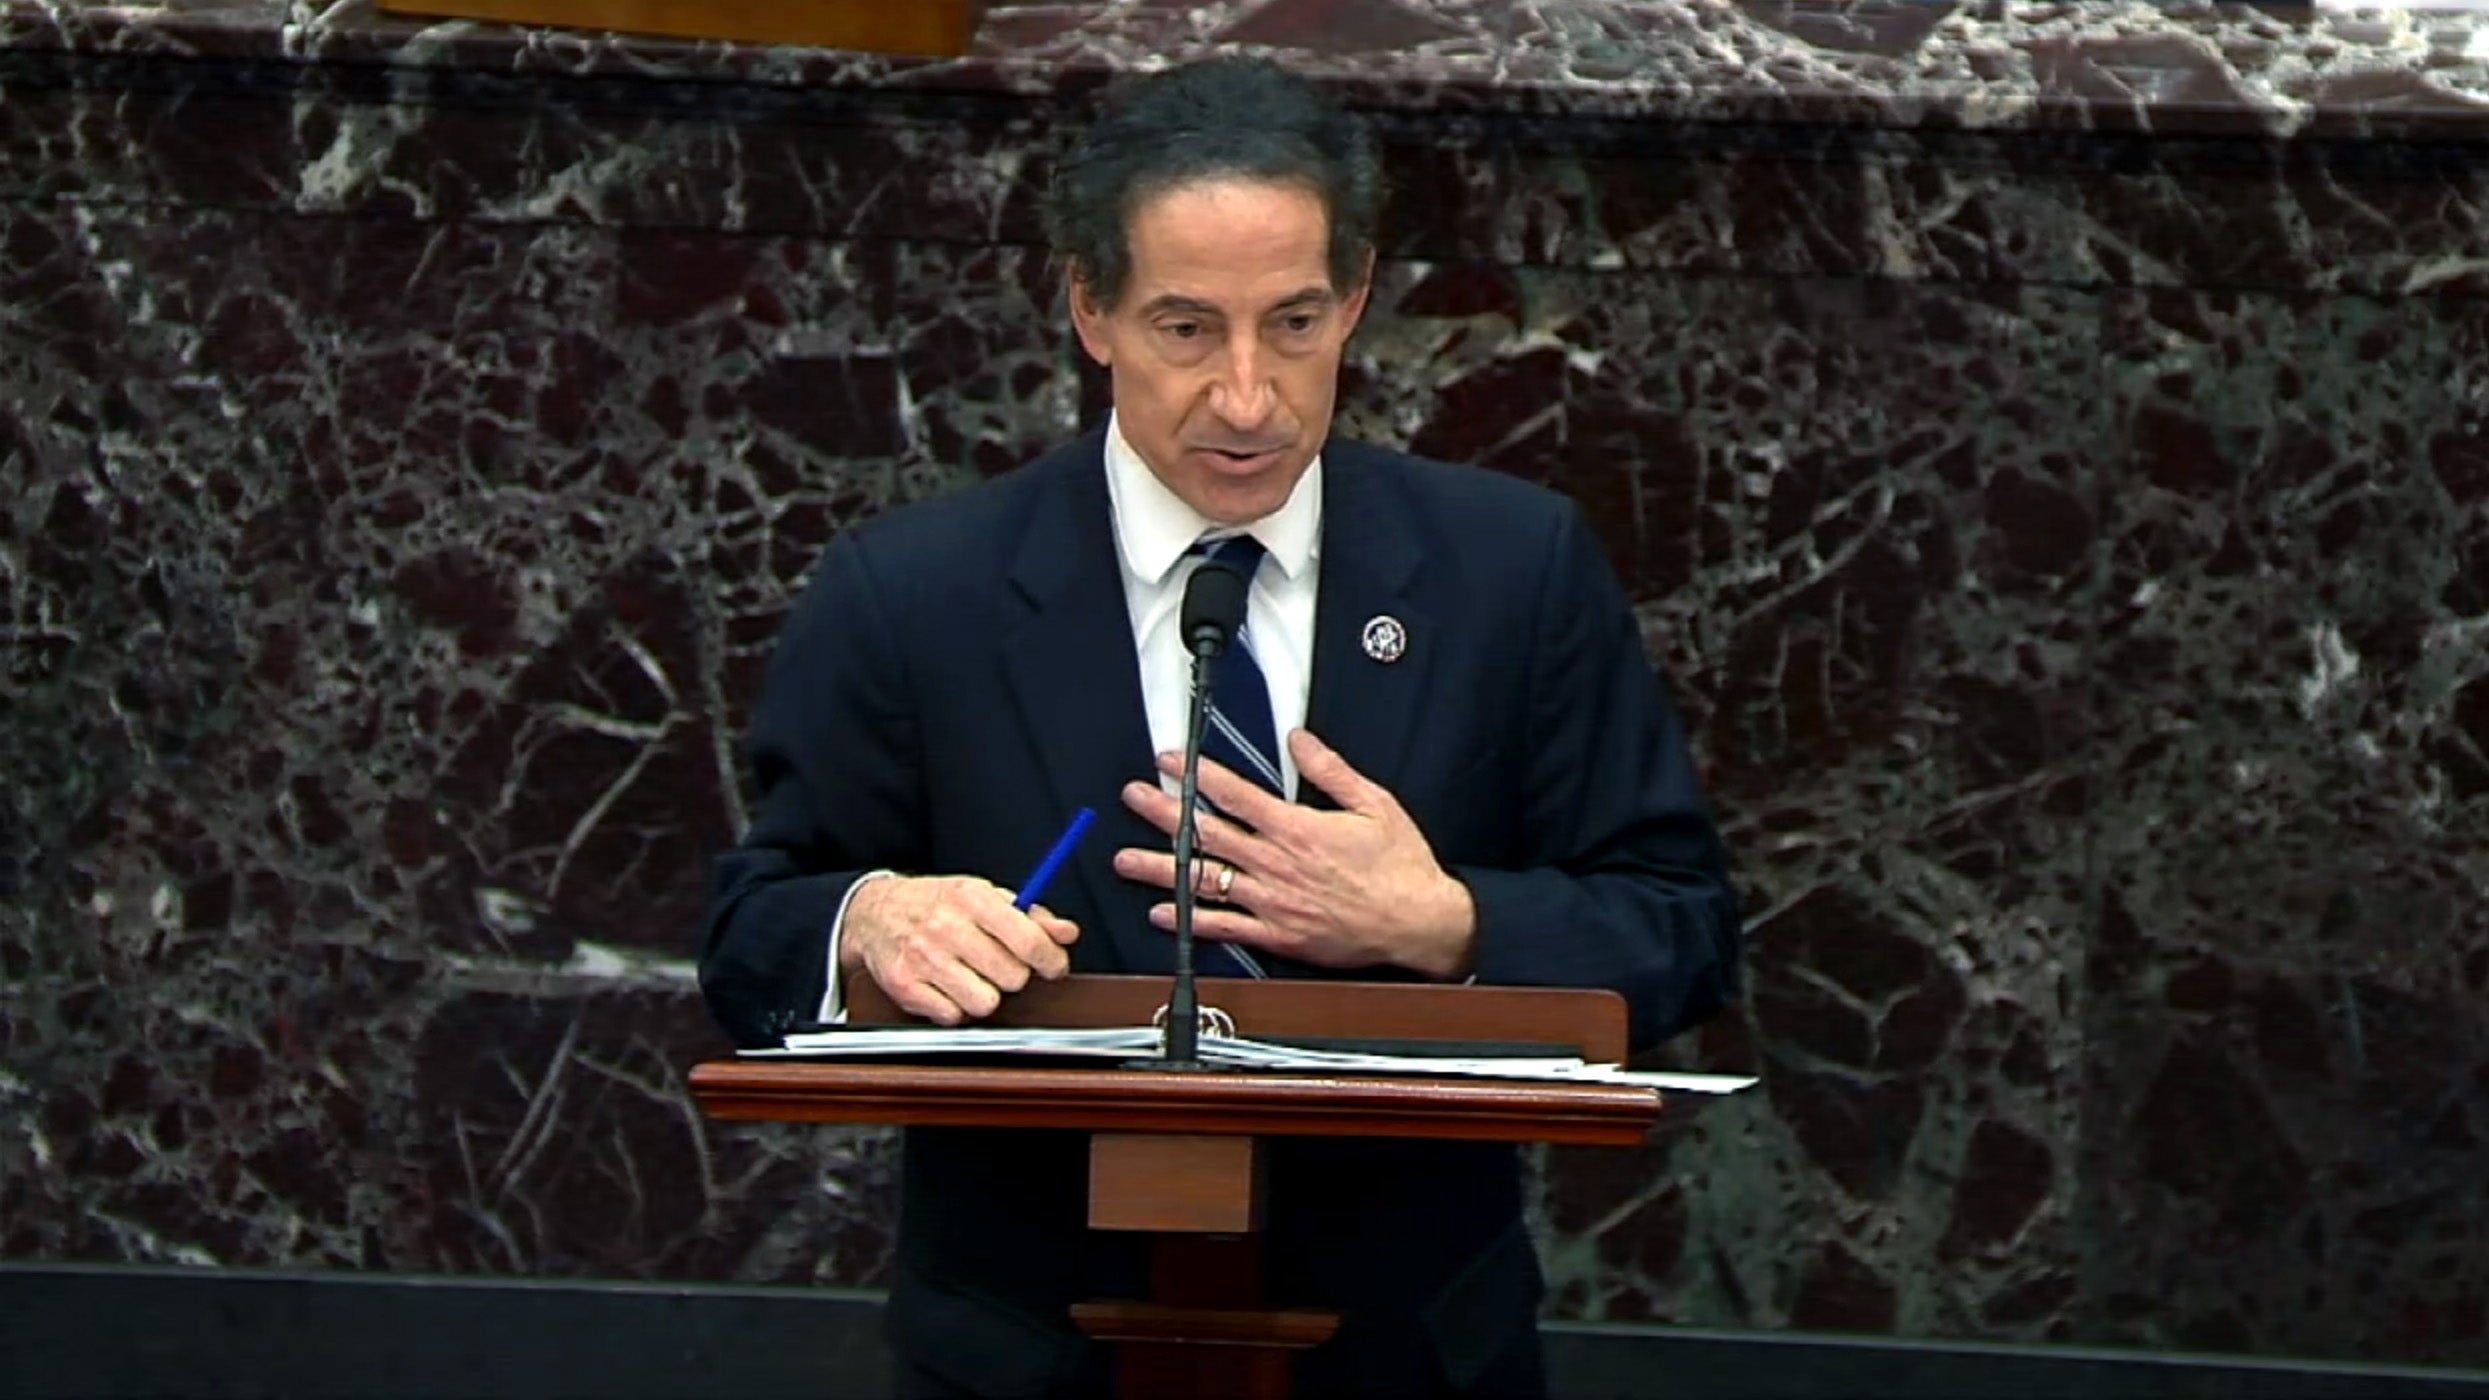 Rep Jamie Raskin (D-MD) gives closing arguments on the fifth day of former President Donald Trump’s second impeachment trial at the US Capitol on 13 February, 2021 in Washington, DC. A new mental health law in Maryland honours Mr Raskin’s late son, Tommy, who died by suicide.